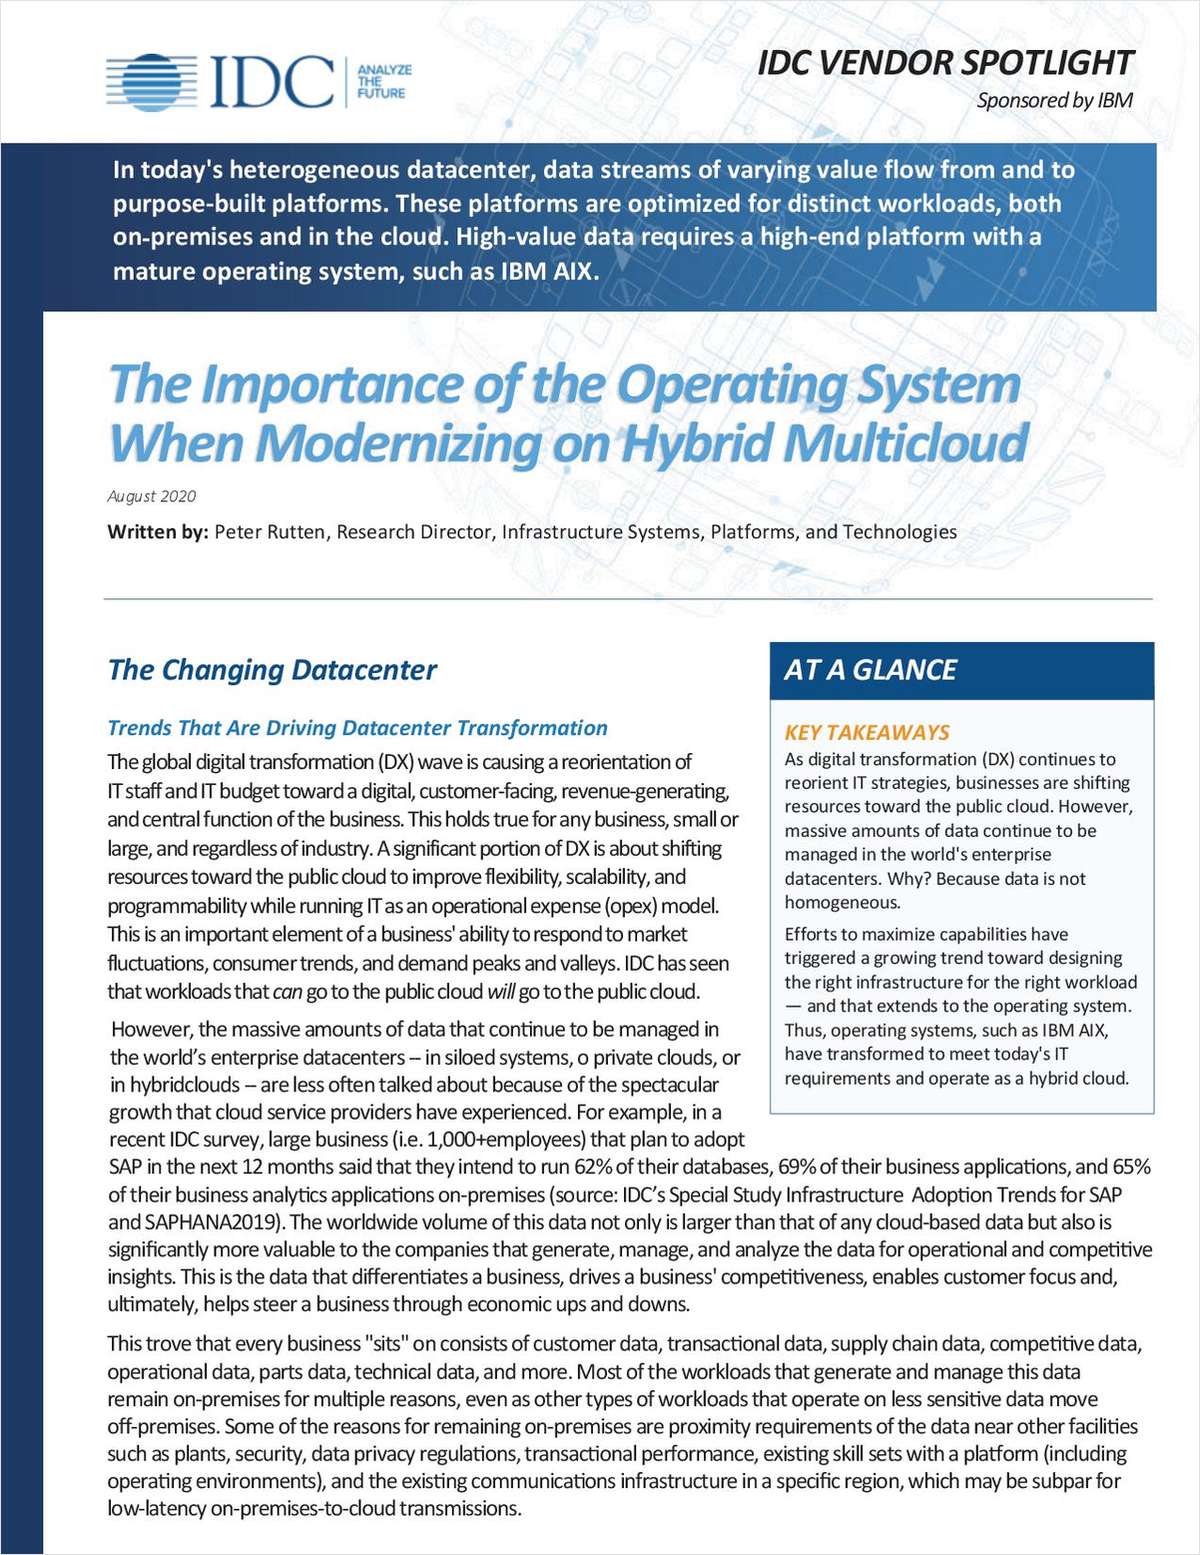 The Importance of the Operating System When Modernizing on Hybrid Multicloud